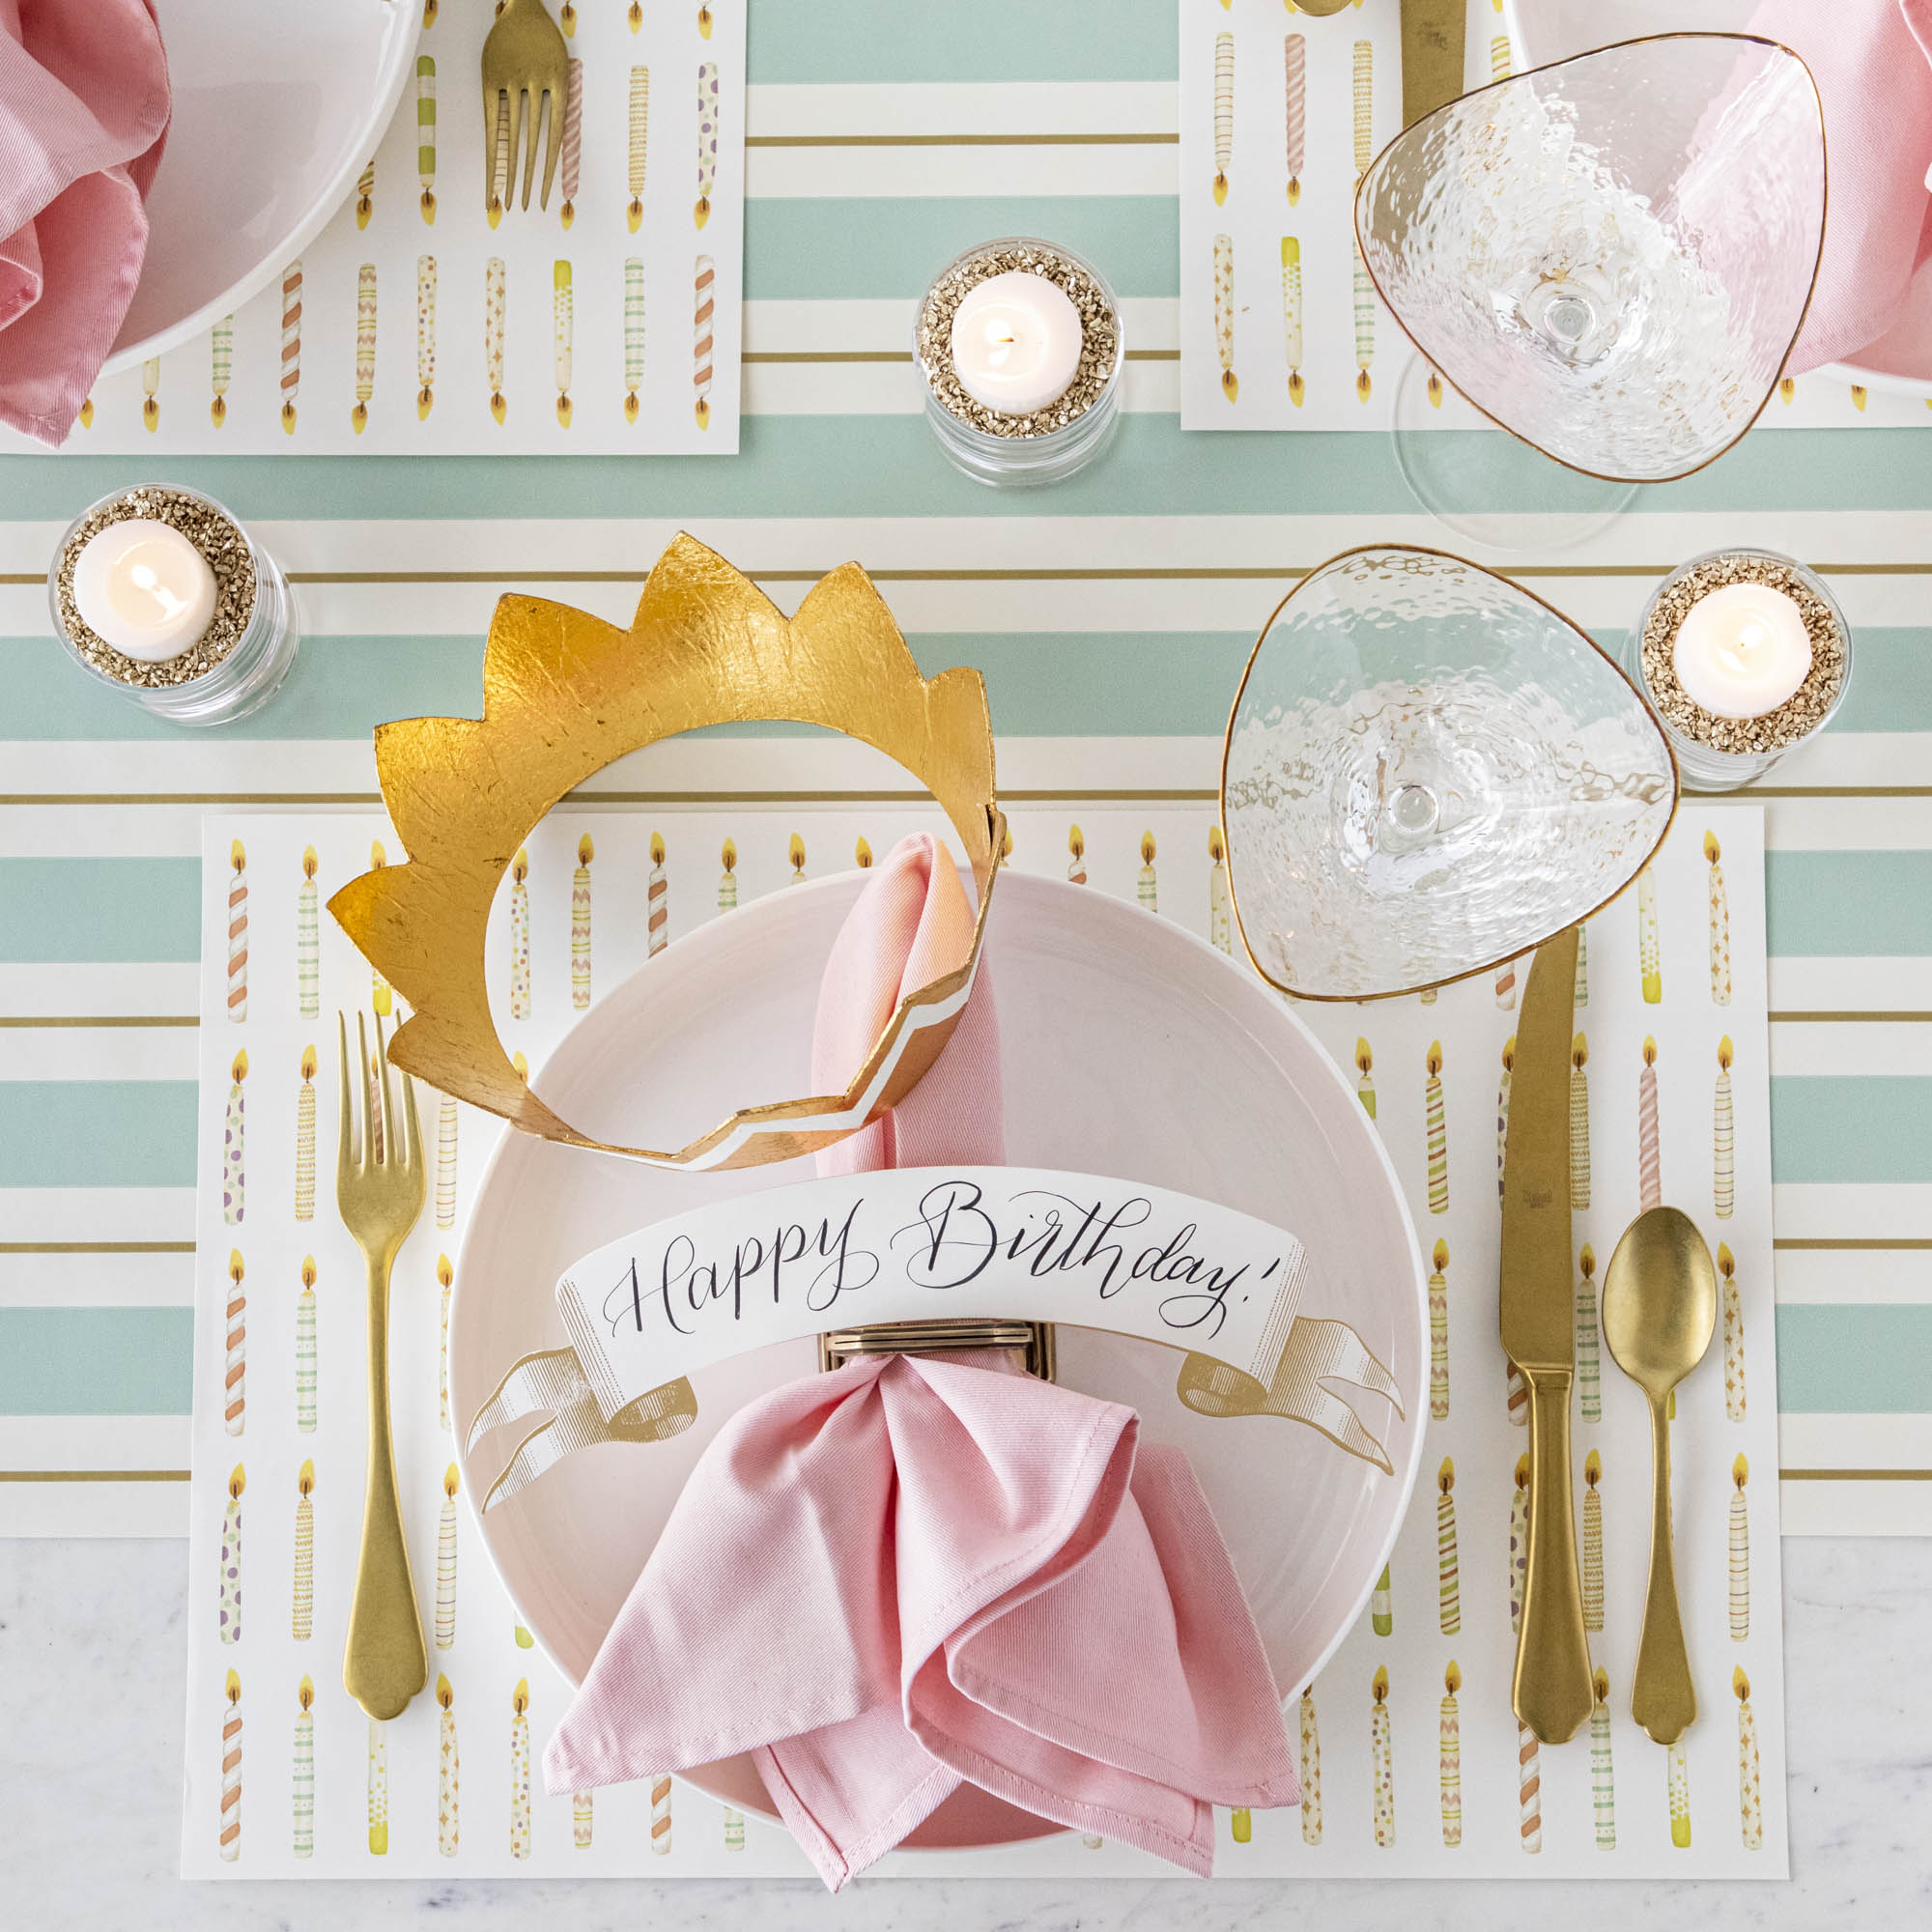 The Seafoam &amp; Gold Awning Stripe Runner under an elegant Birthday table setting, from above.